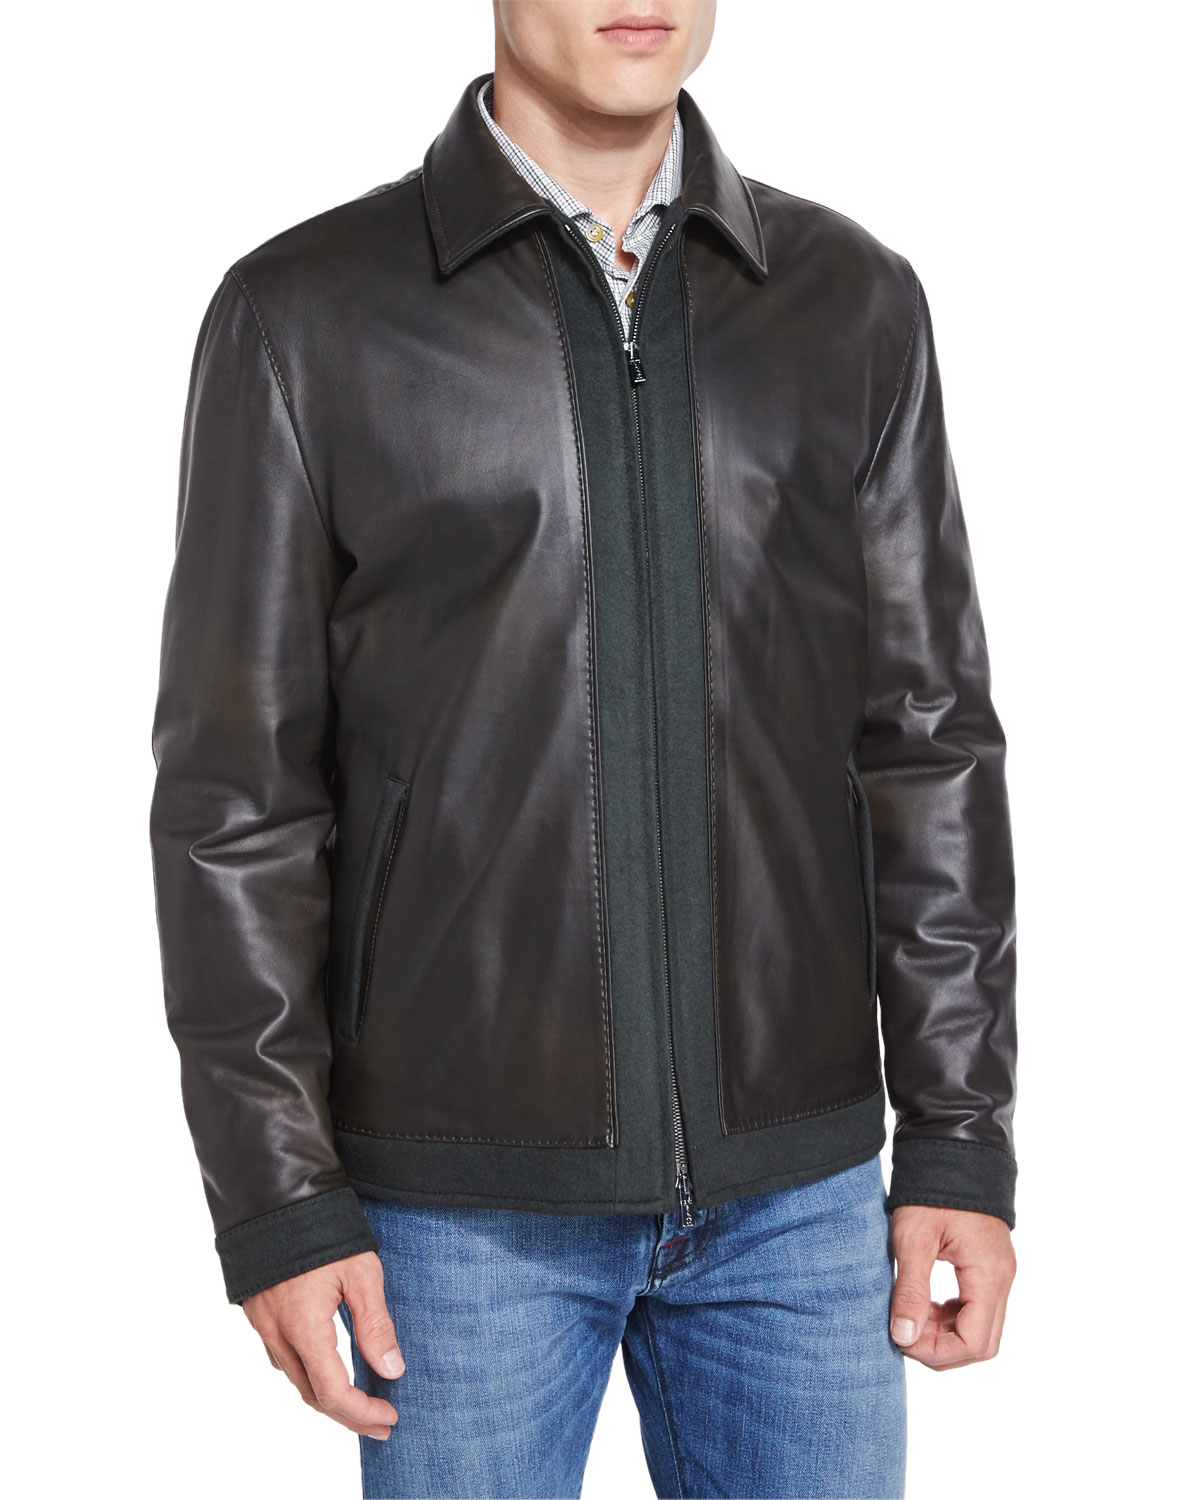 Lyst - Kiton Leather Bomber Jacket With Cashmere Trim in Black for Men